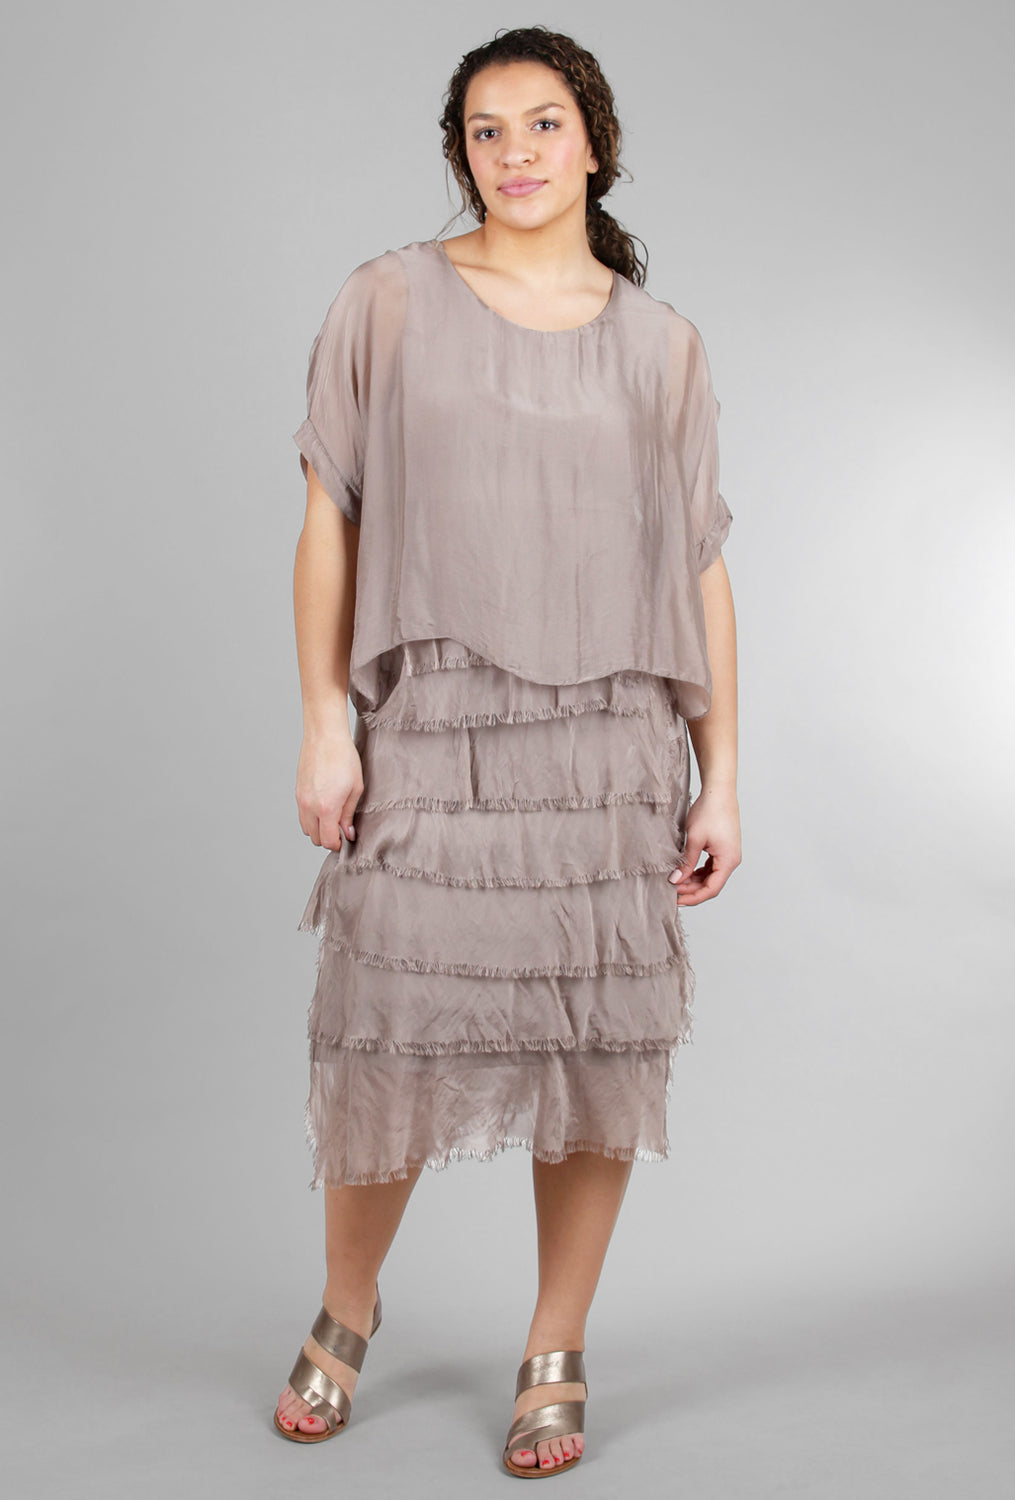 Look Mode Sleeved Tattered-Tiers Dress, Taupe 